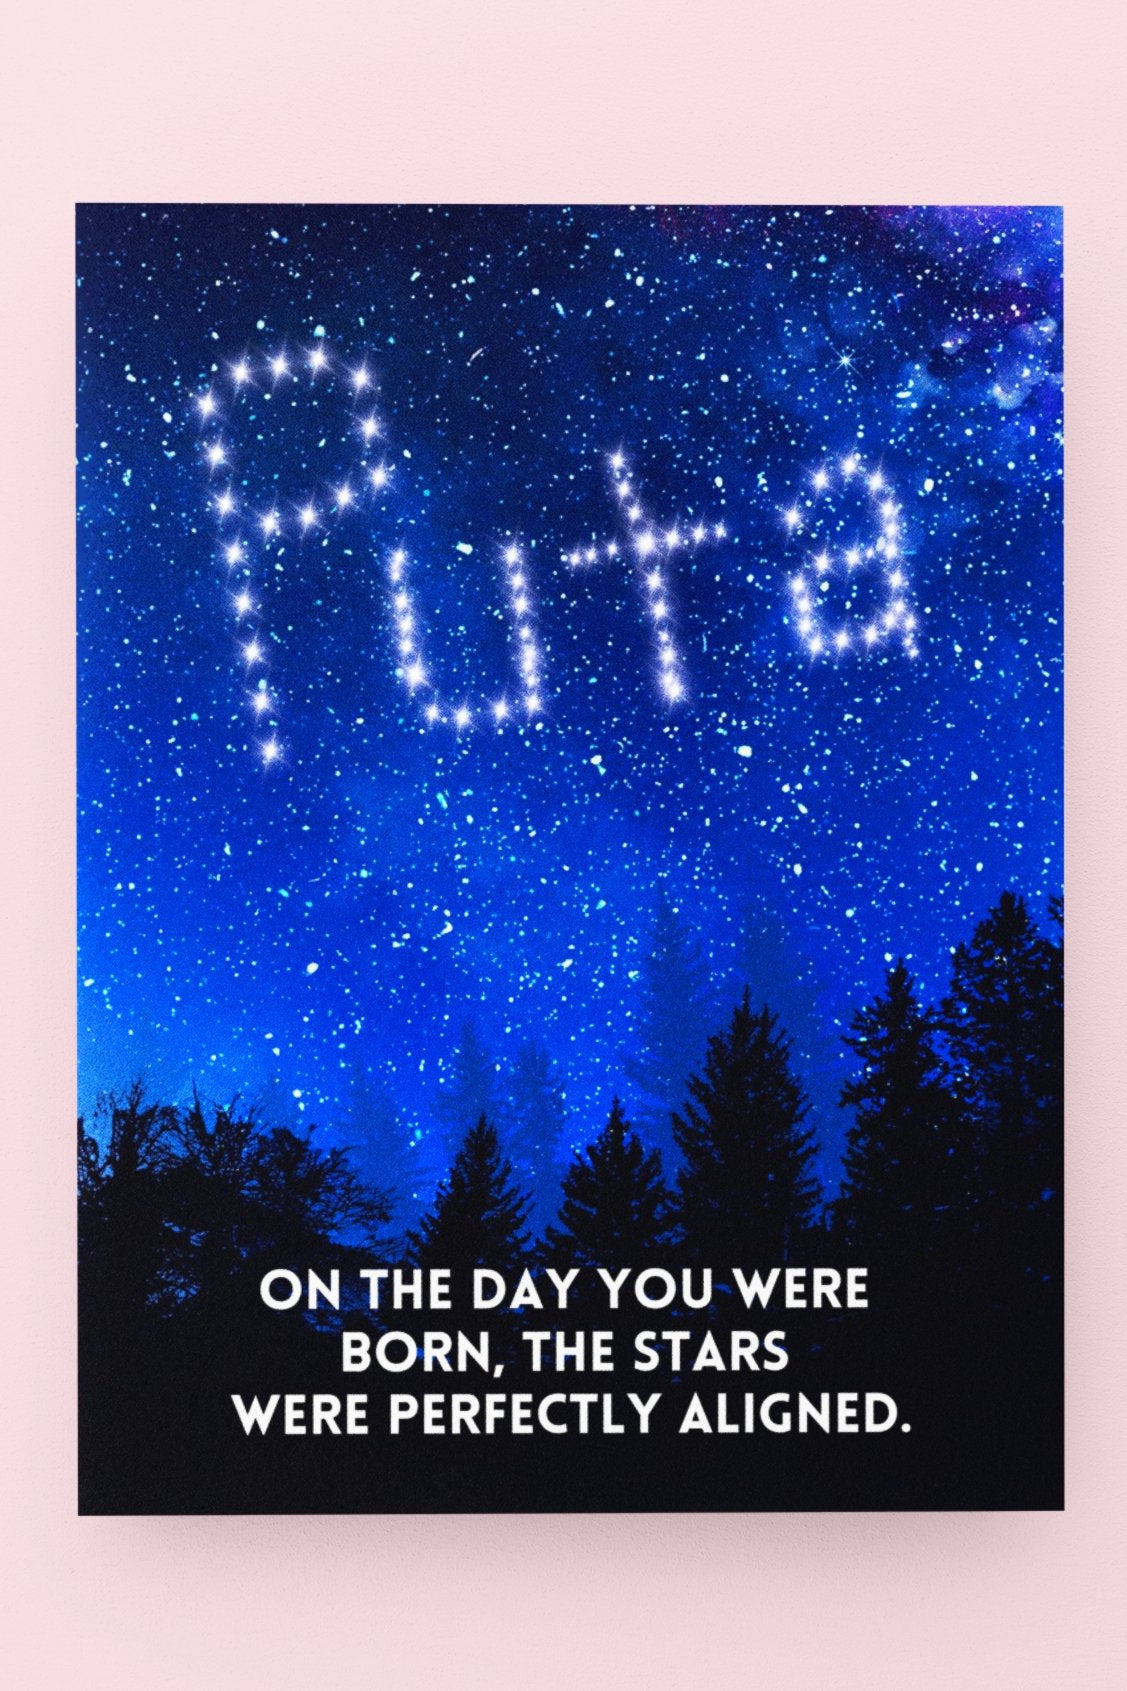 On The Day You Were Born The Stars Were Perfectly Aligned- Spanish Insult Card - UntamedEgo LLC.